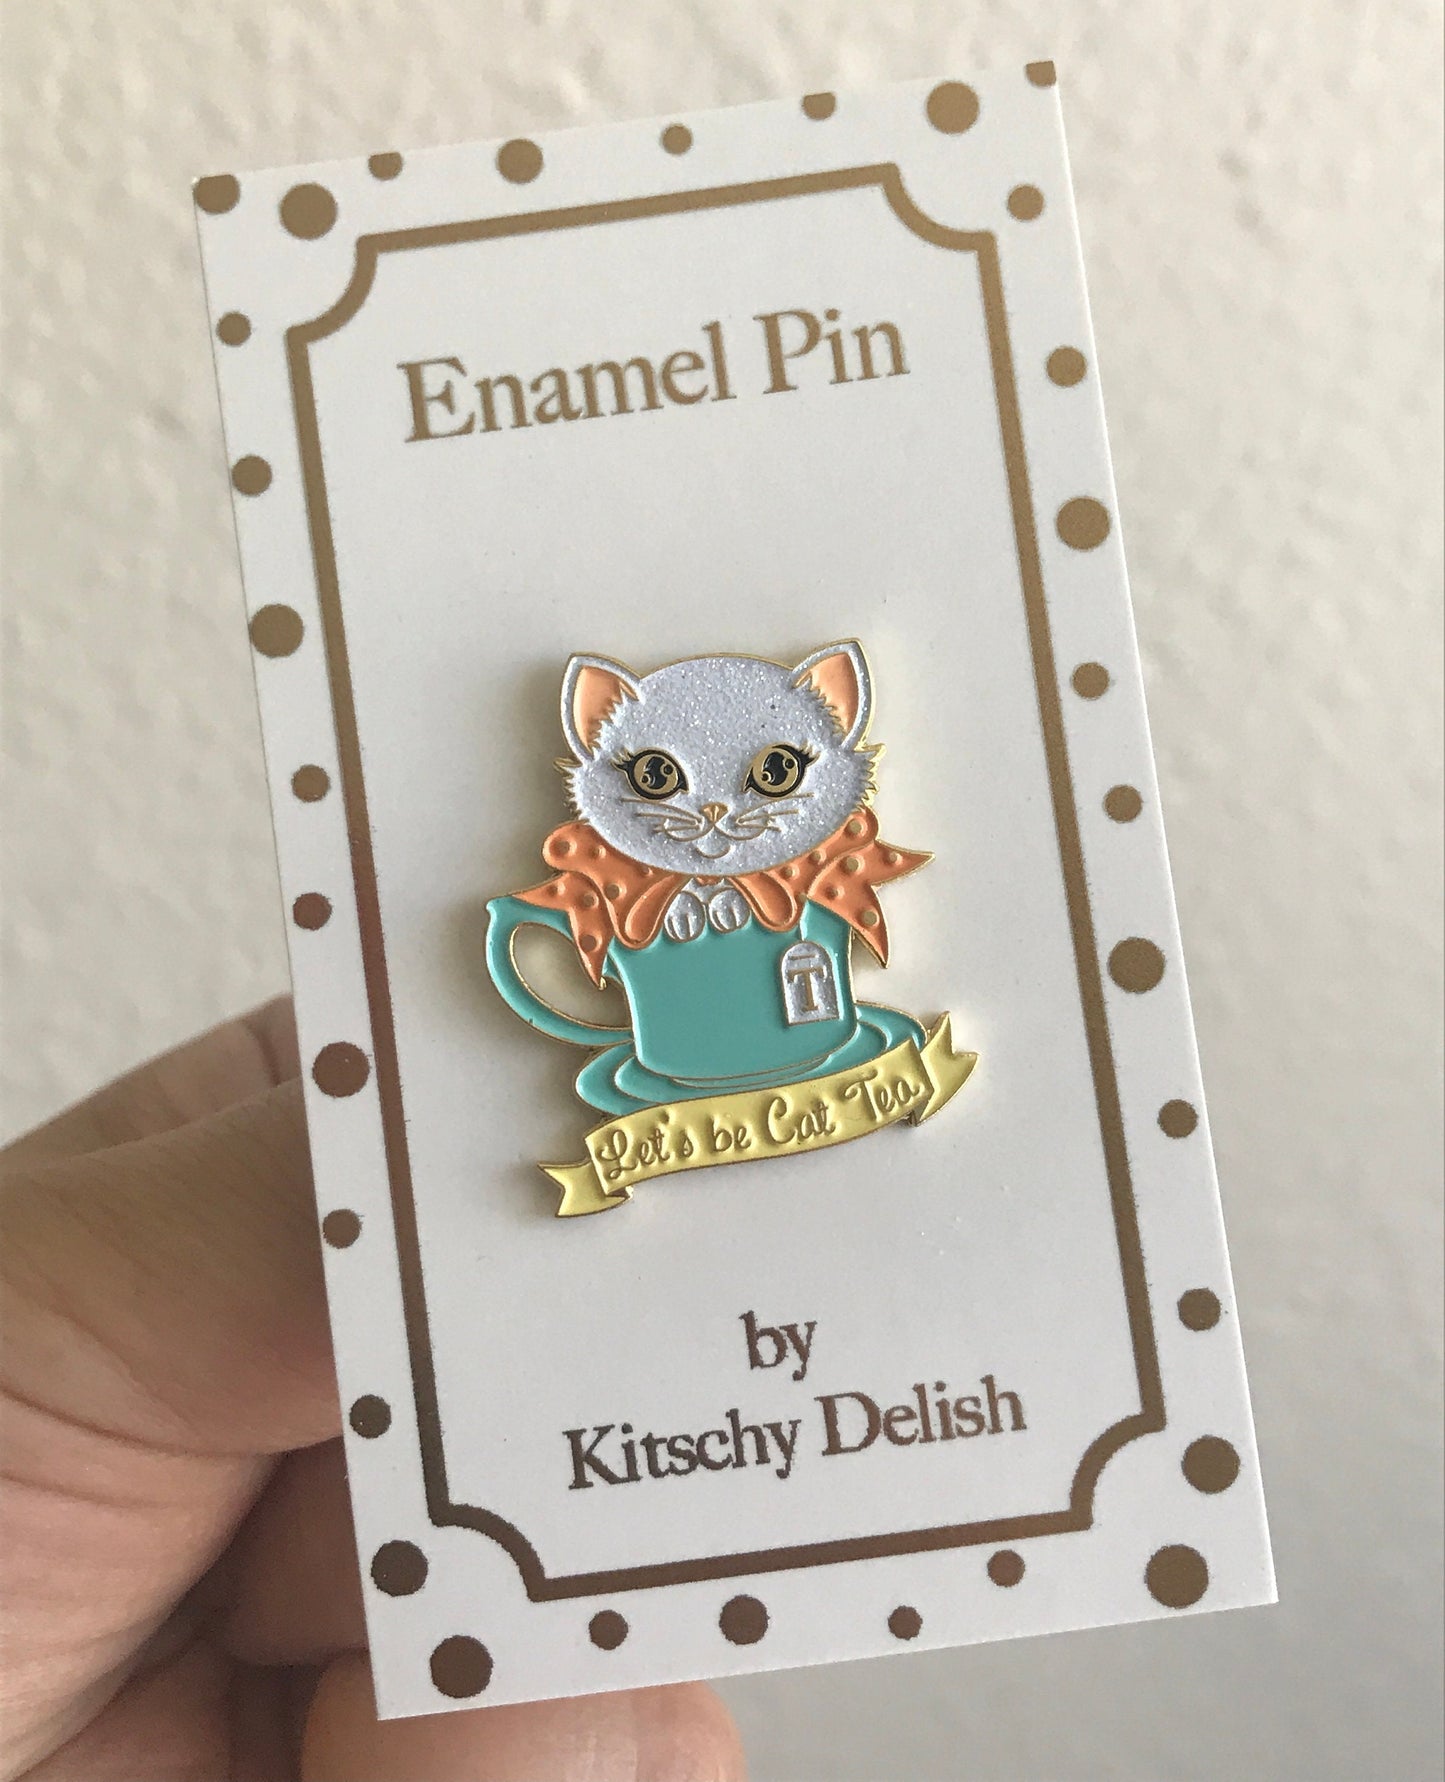 Let’s be Cat Tea soft enamel pin with glittery highlights